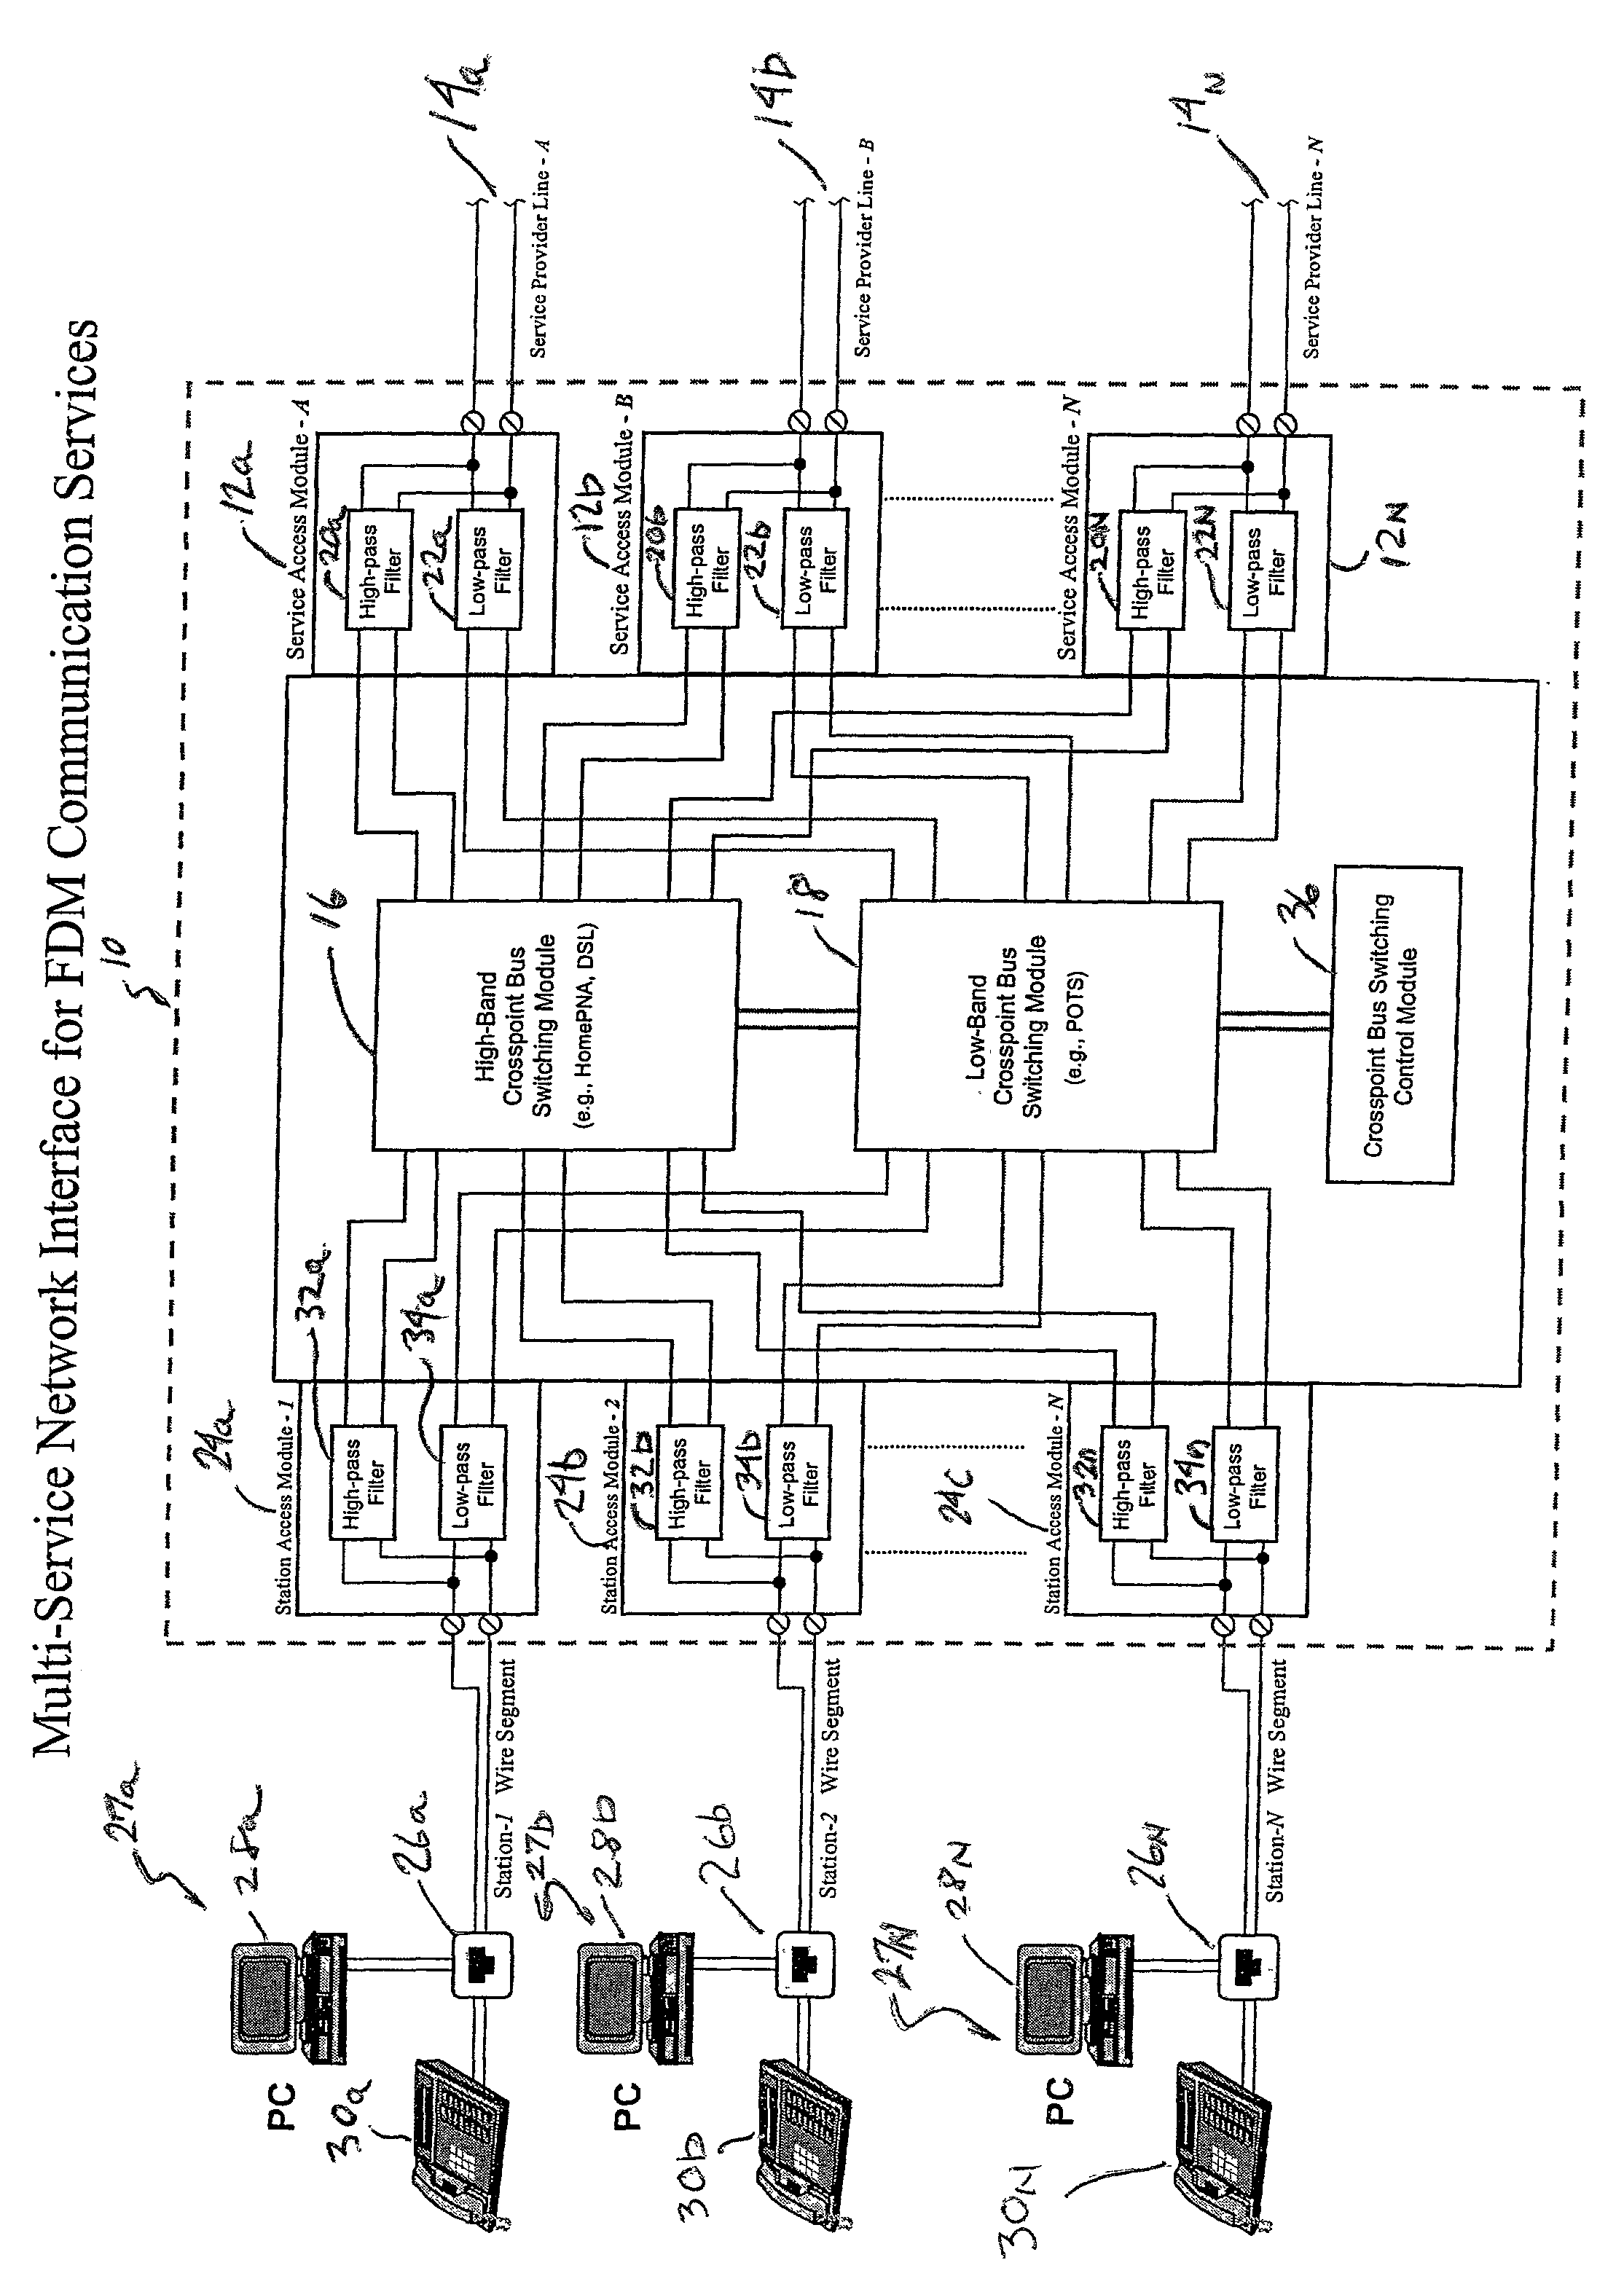 Multi-service network interface method for frequency-division multiplexed communications systems